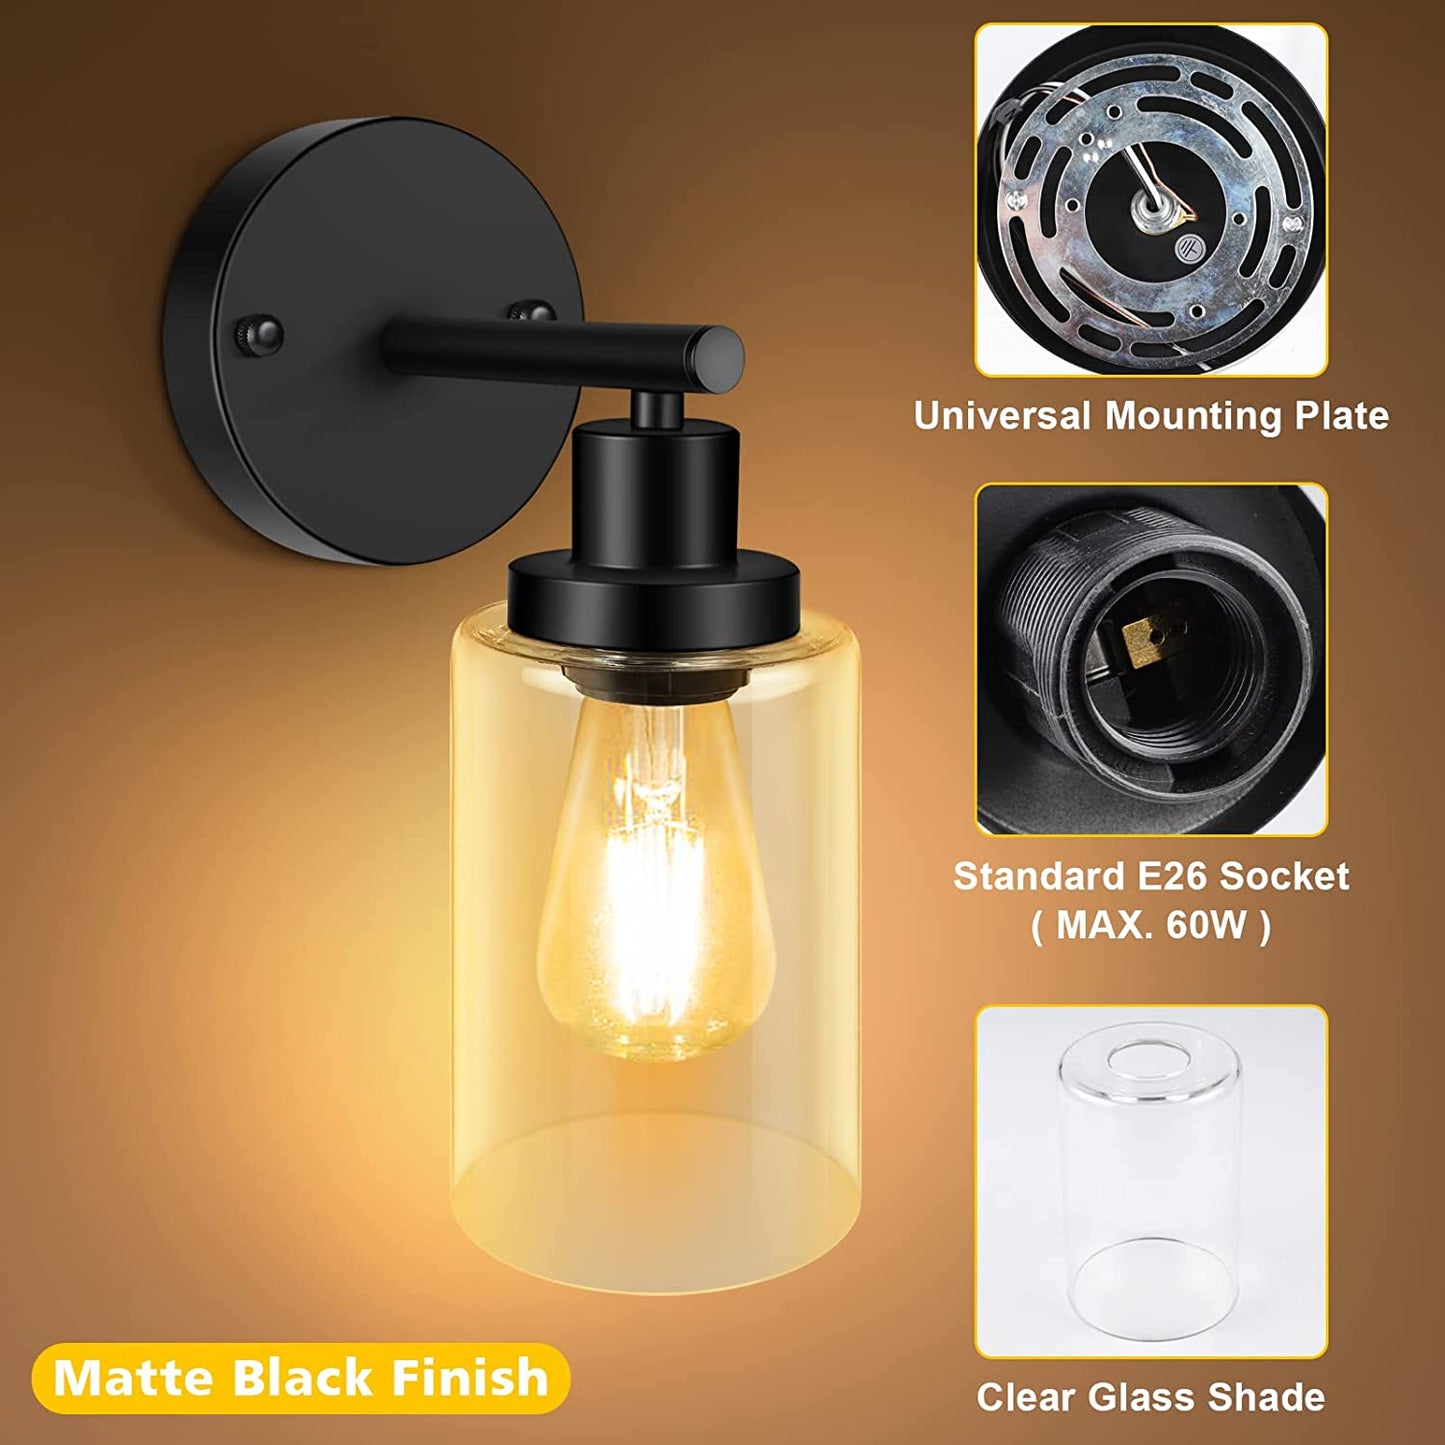 Modern Matte Black 1 Light Wall Sconce, Vanity Light Fixtures with Clear Glass Shade, Wall Lights for Living Room, Bedroom, Kitchen, Hallway, Mirror, 1 Count, E26 Base (Bulbs Not Included)